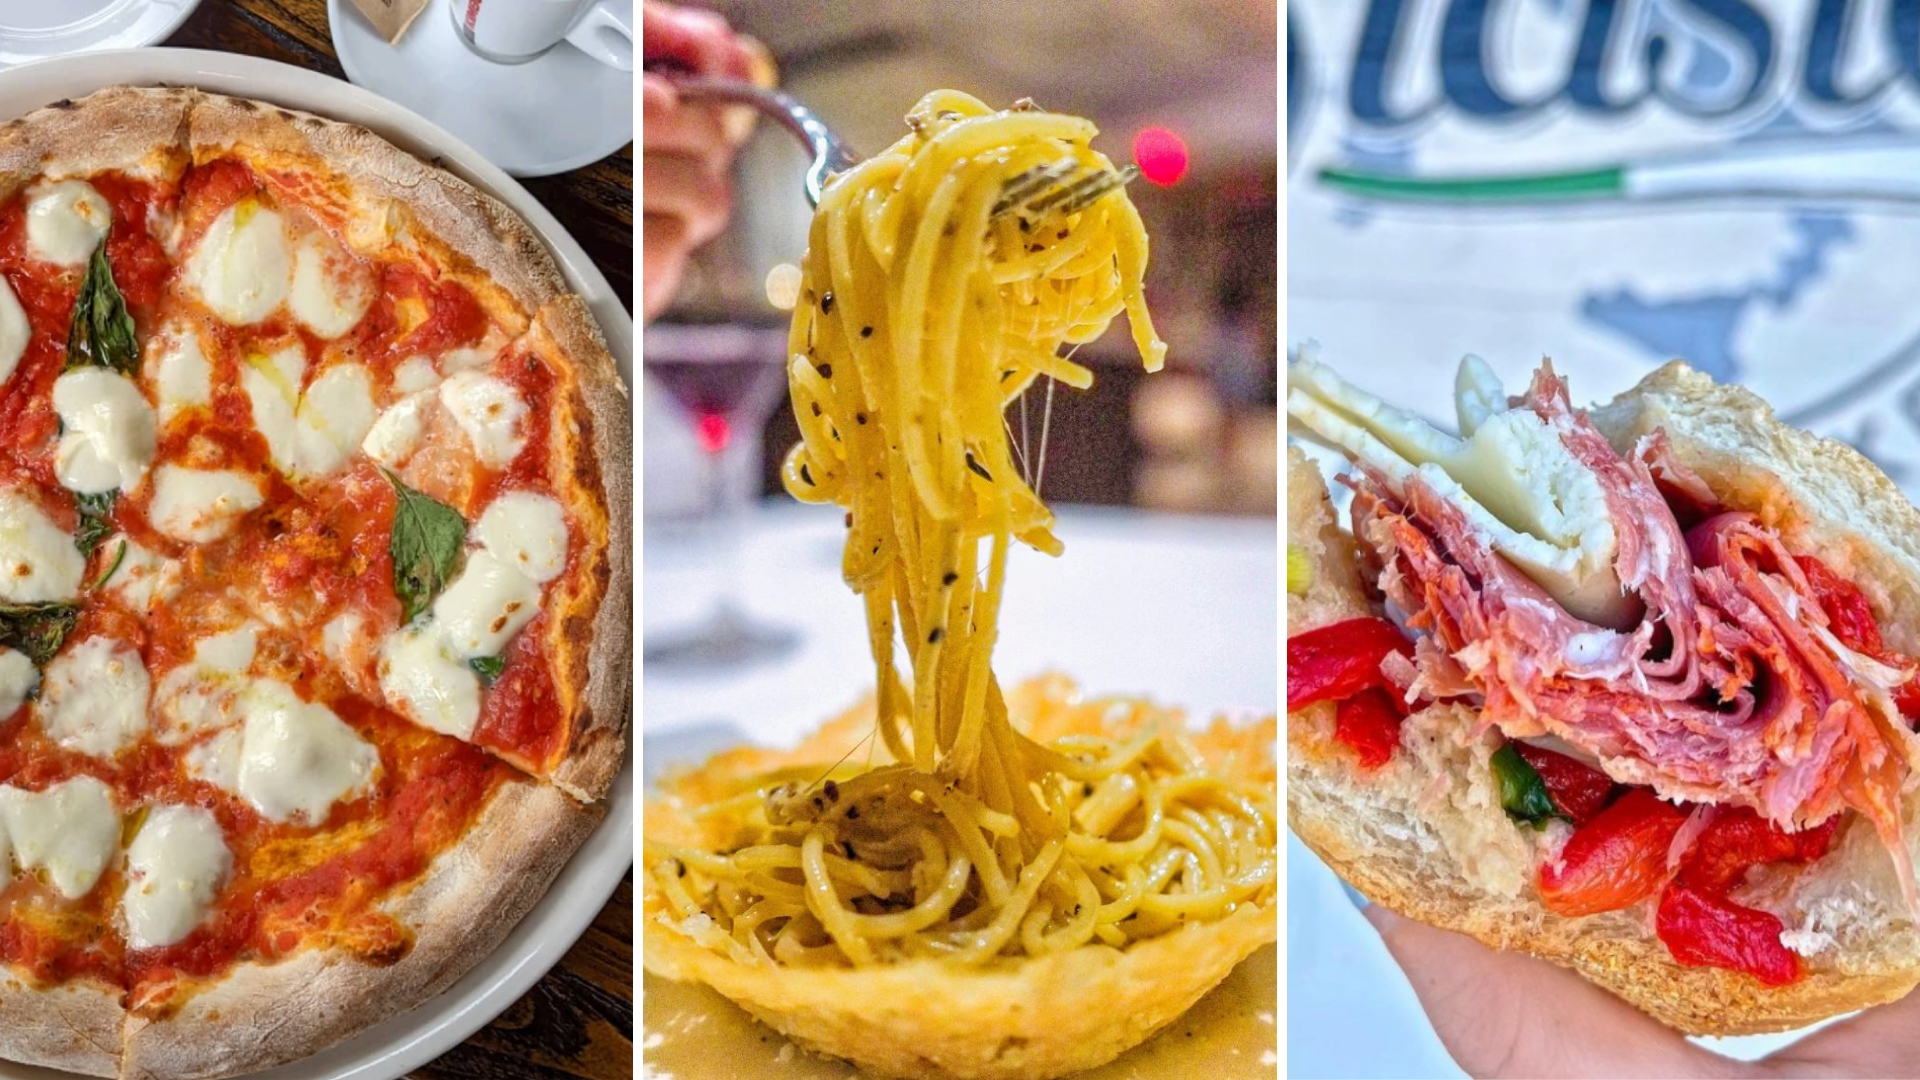 Our 25 Favorite Italian Restaurants in Orlando - Spring 2021 - Tasty Chomps: A Local's Culinary Guide